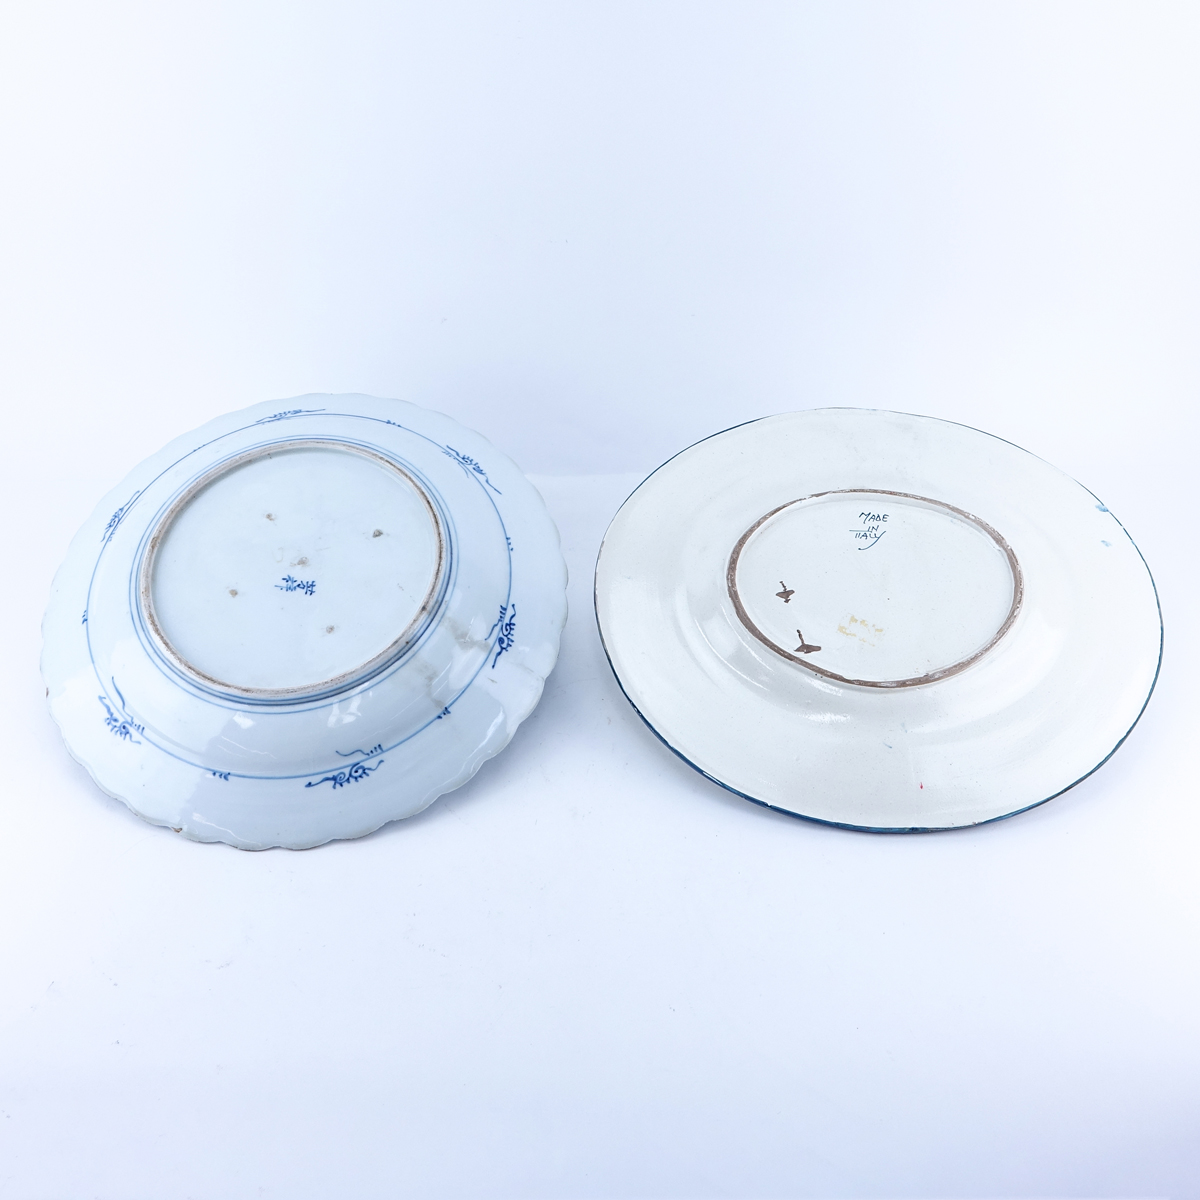 Grouping of Two (2): Large Italian Faience Blue and White Pottery Platters, Large Japanese Blue and White Porcelain Charger. Each signed to base.